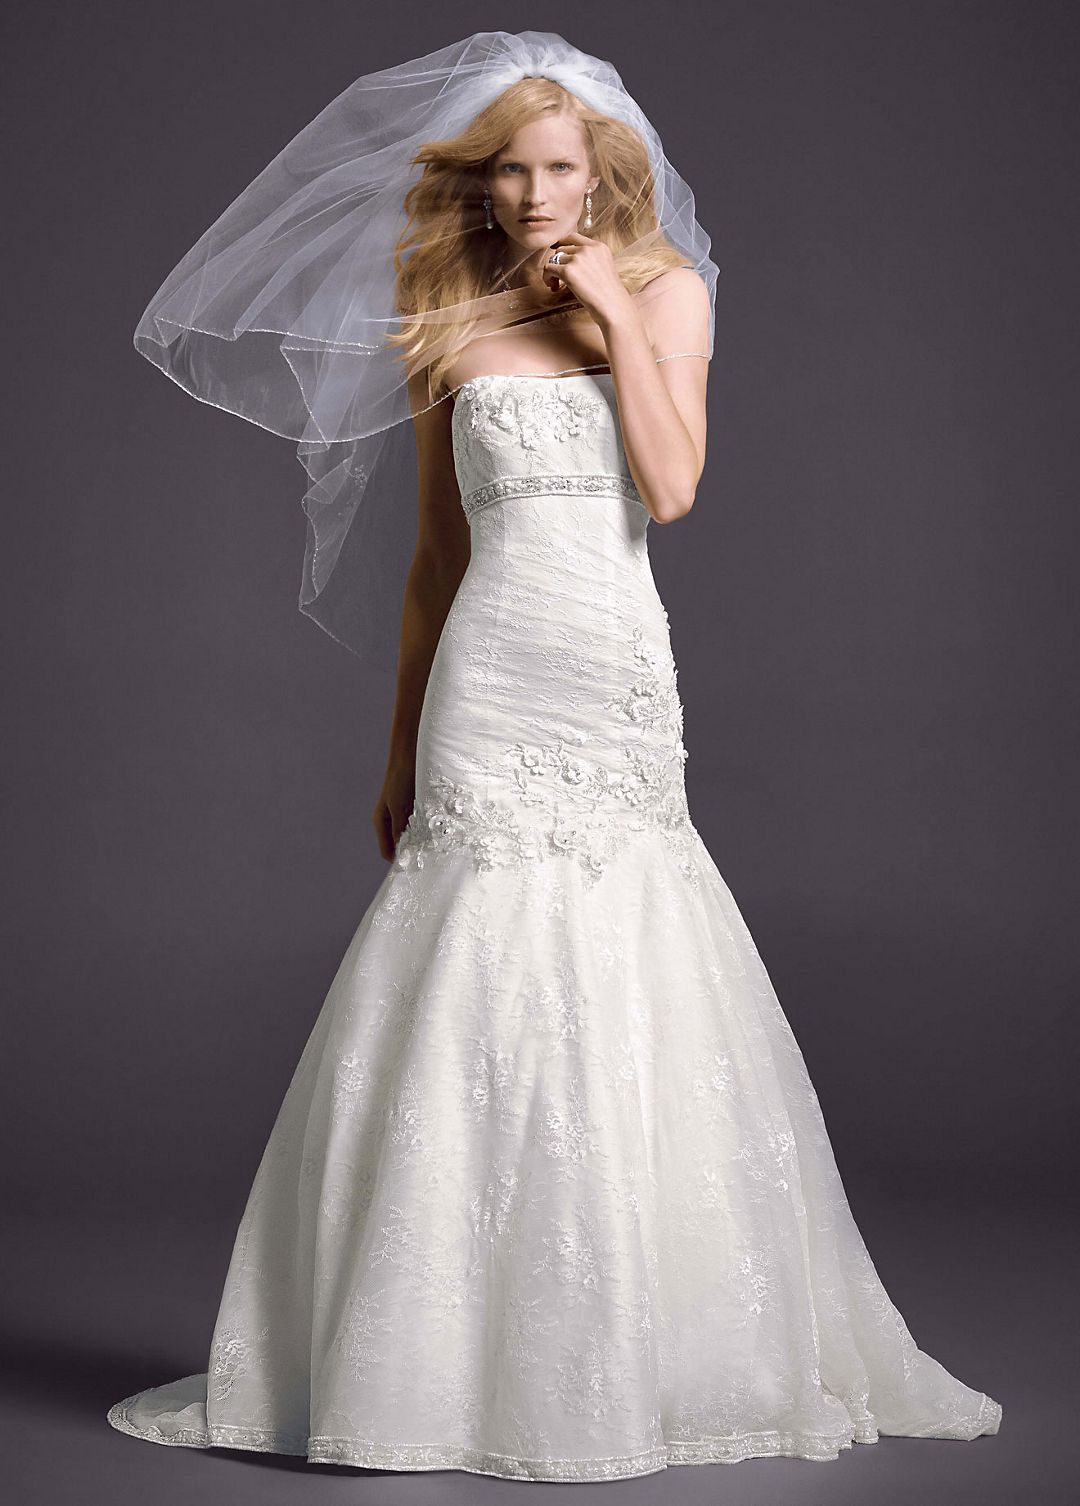 Lace Mermaid Gown with Floral Details Image 1